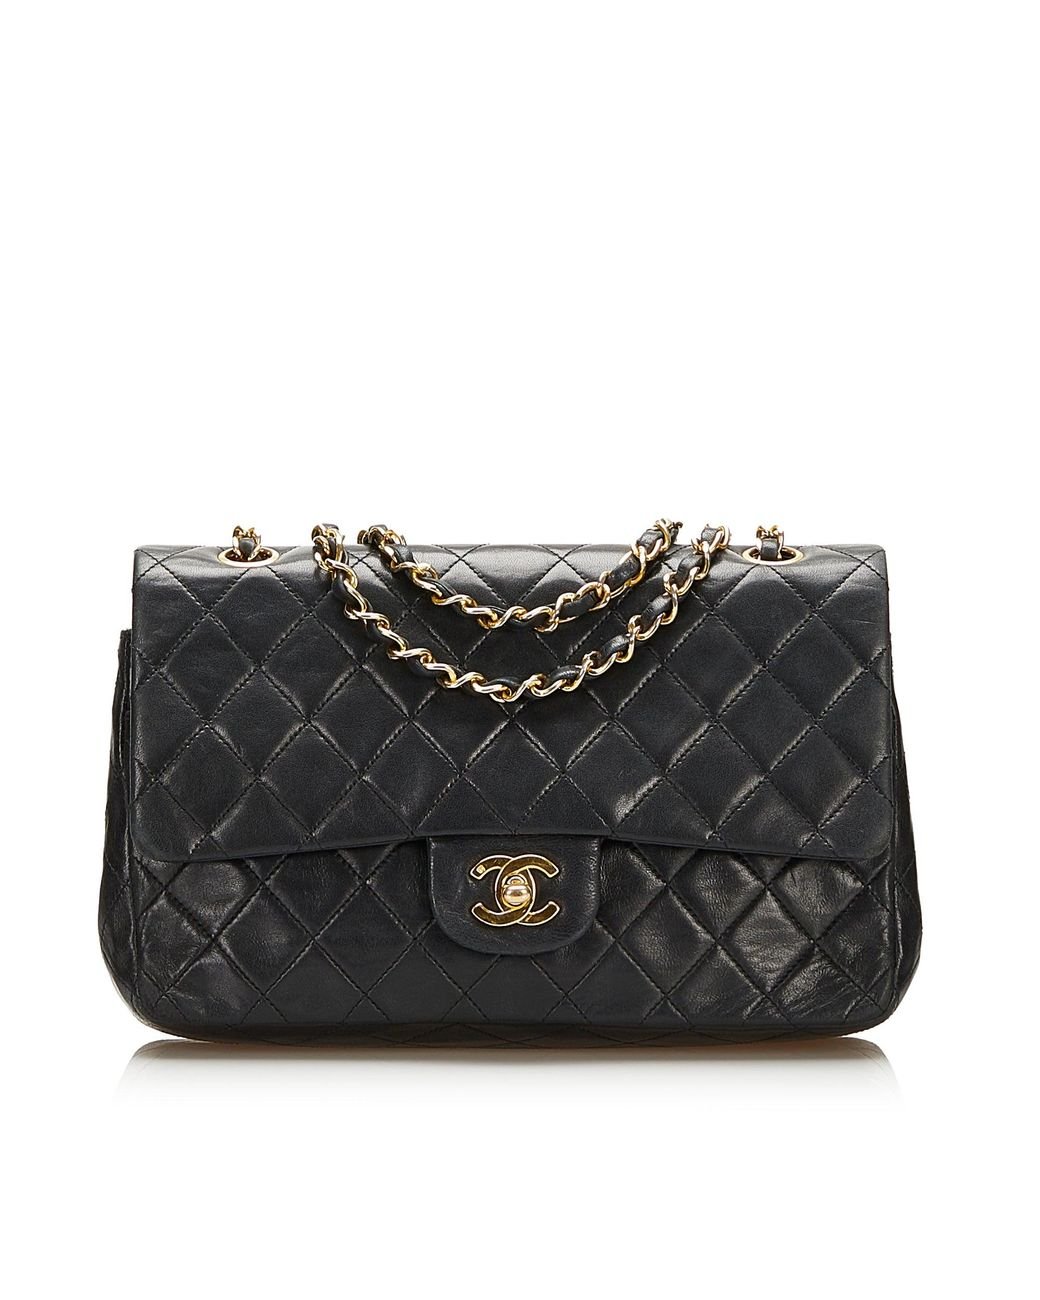 Black collection Chanel Medium Classic Lambskin Double Flap Bag